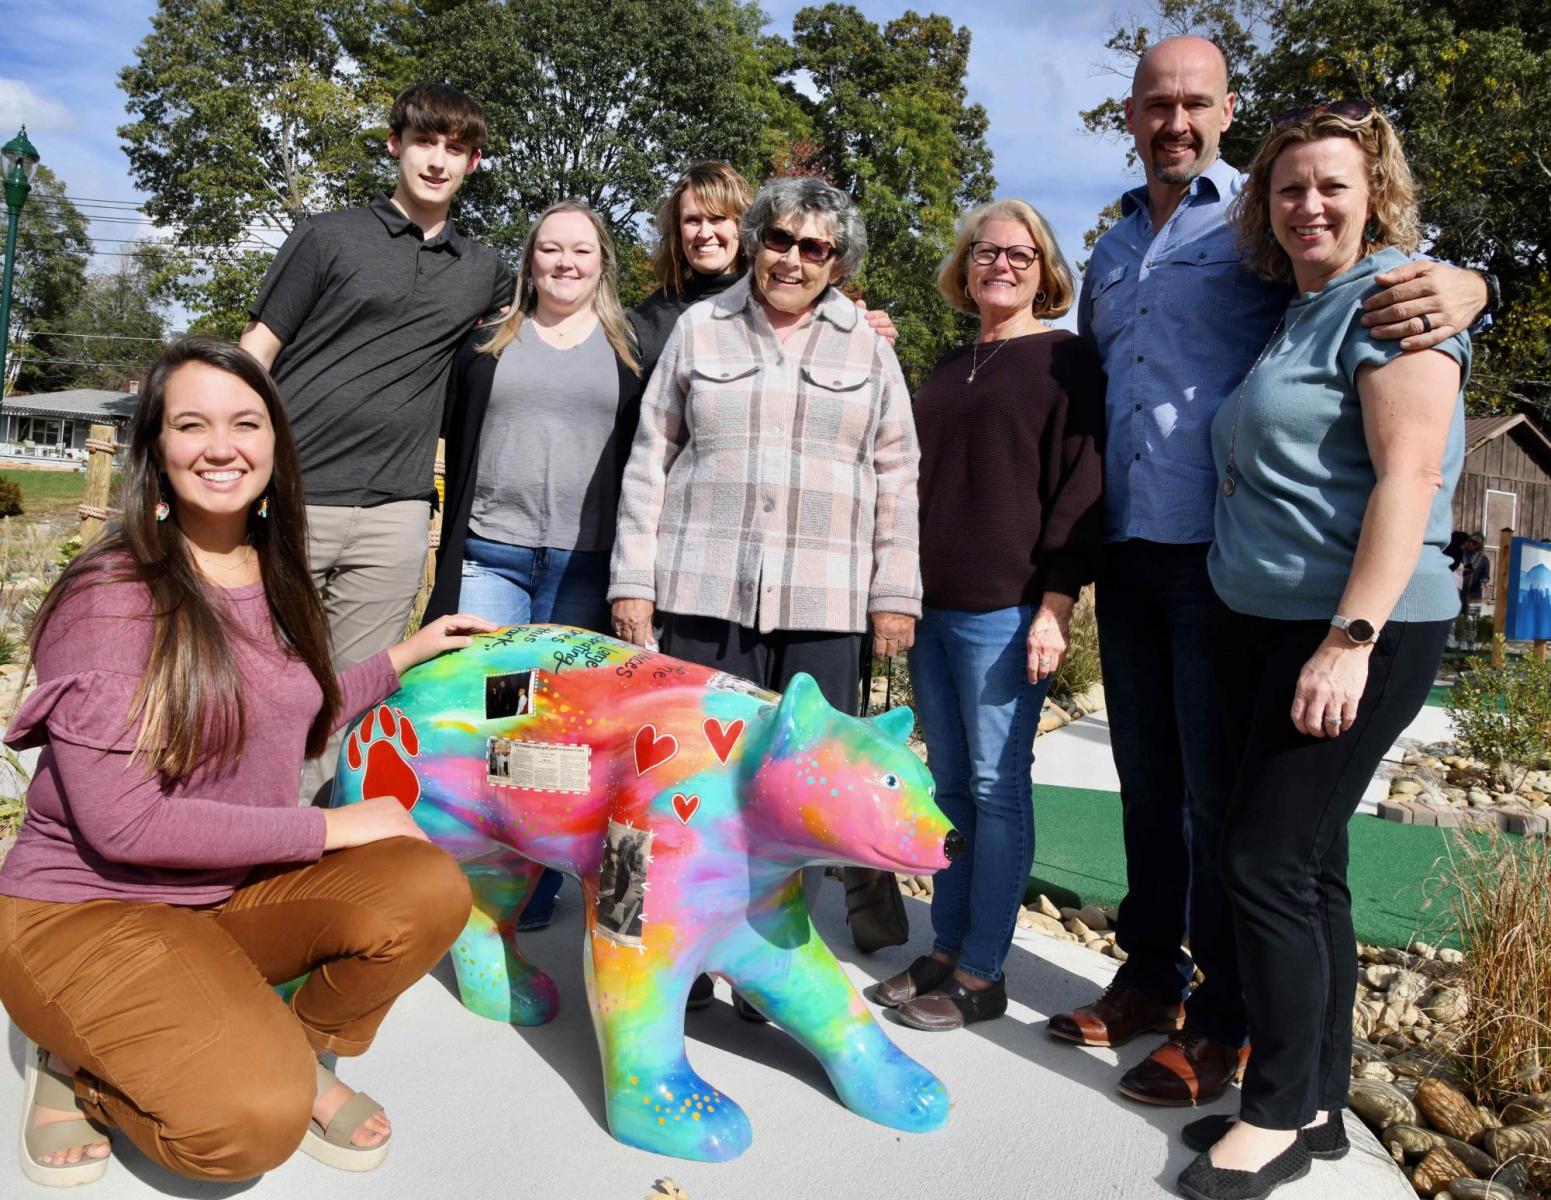 Artist Bethany Joy and members of Laura Corn's family pose next to a bear statue created in her honor